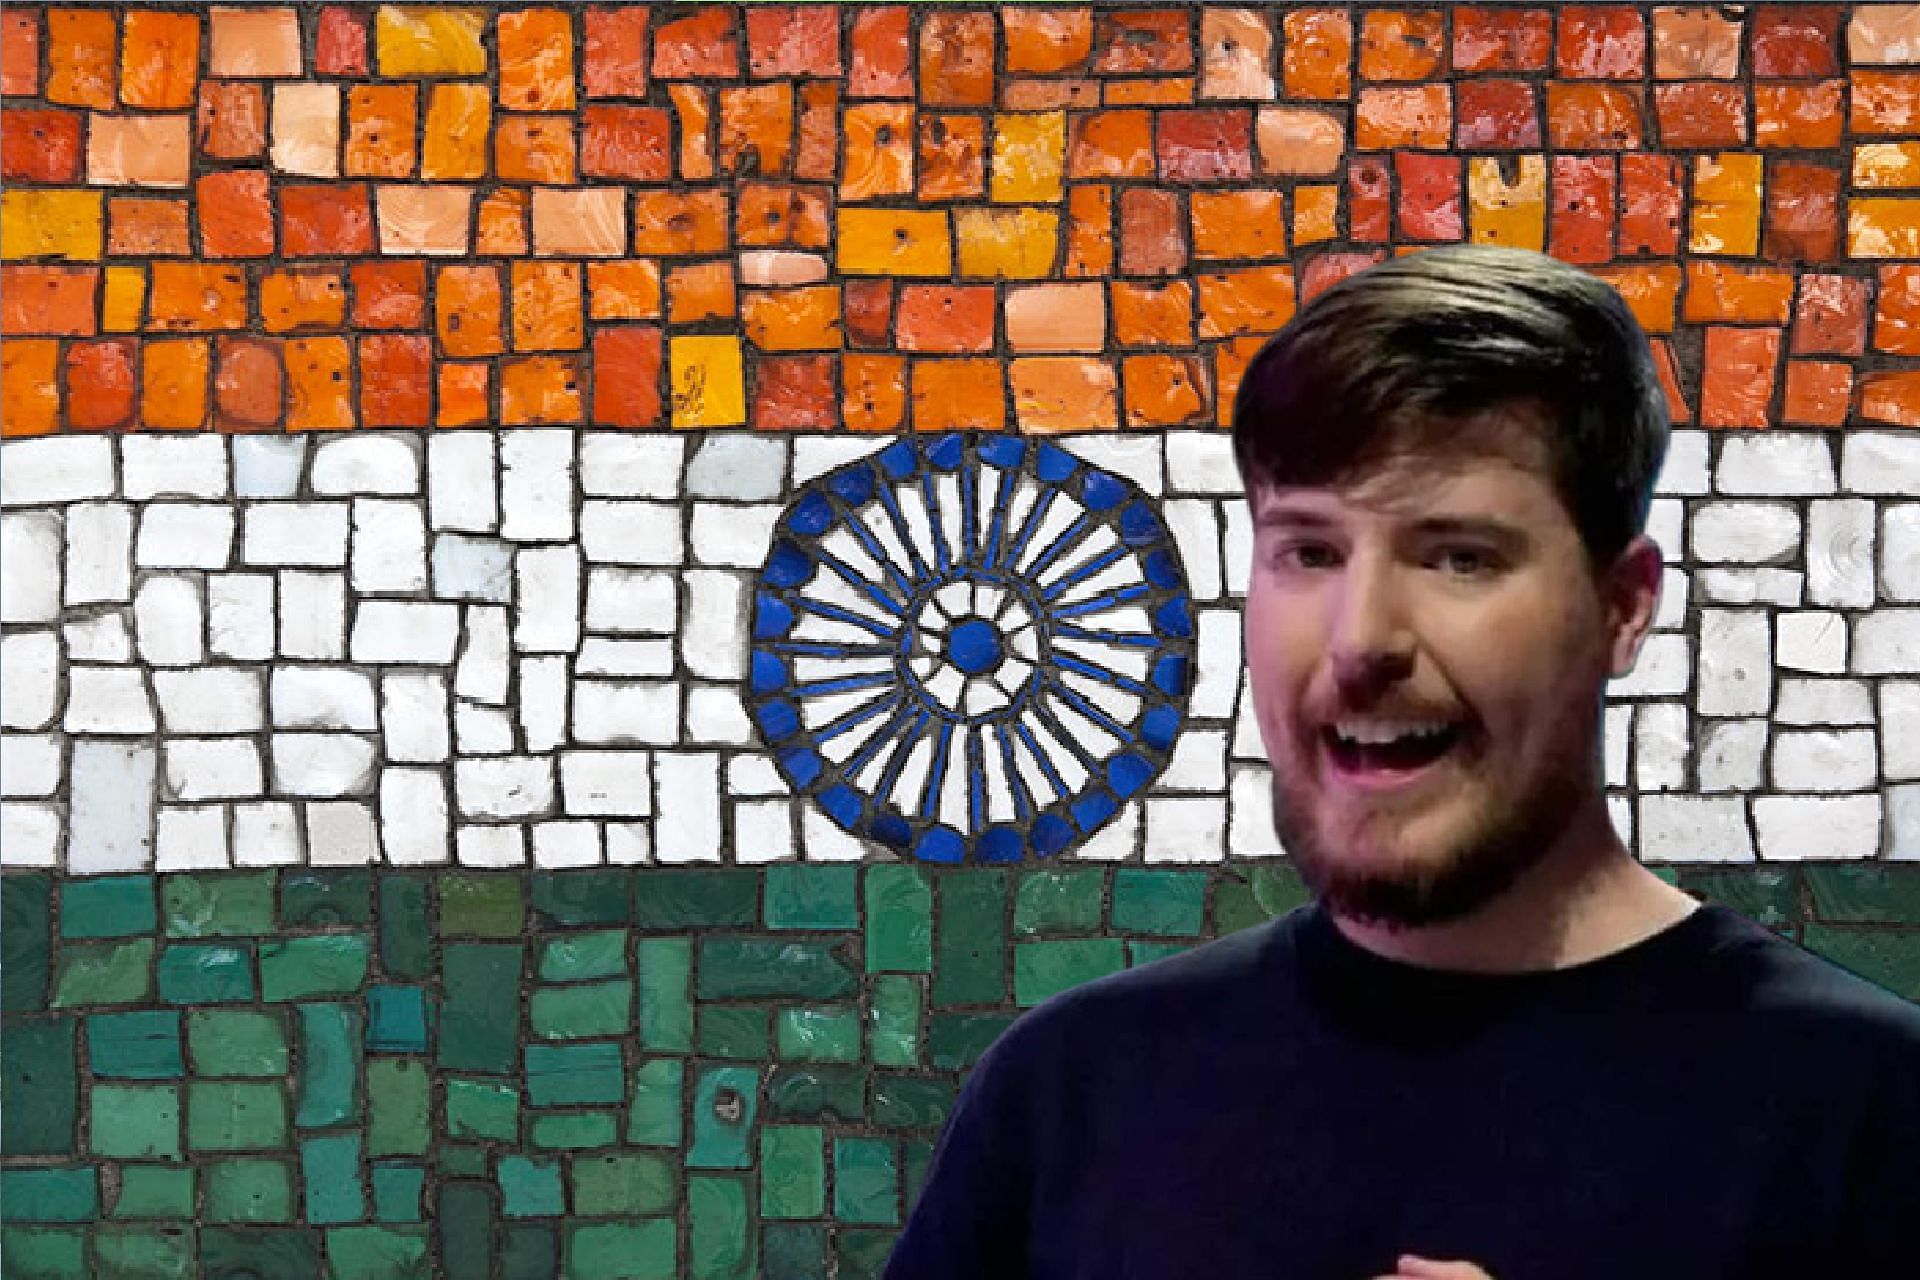 MrBeast India: People request photo with r. What followed